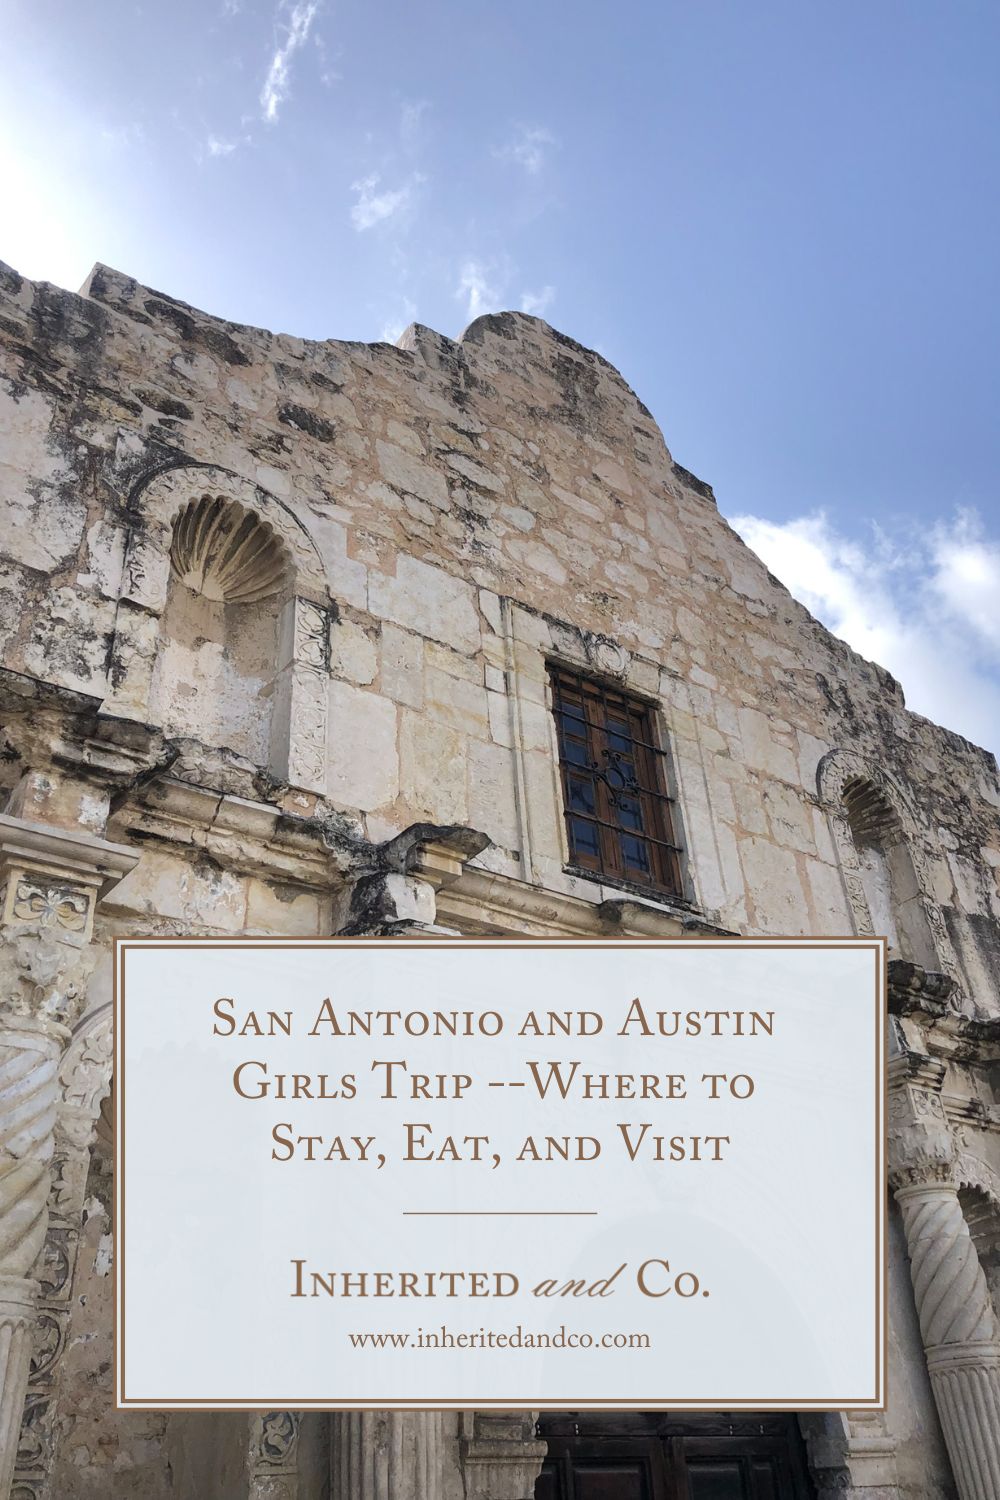 The Alamo -- "San Antonio and Austin Girls Trip--Where to Stay, Eat, and Visit"